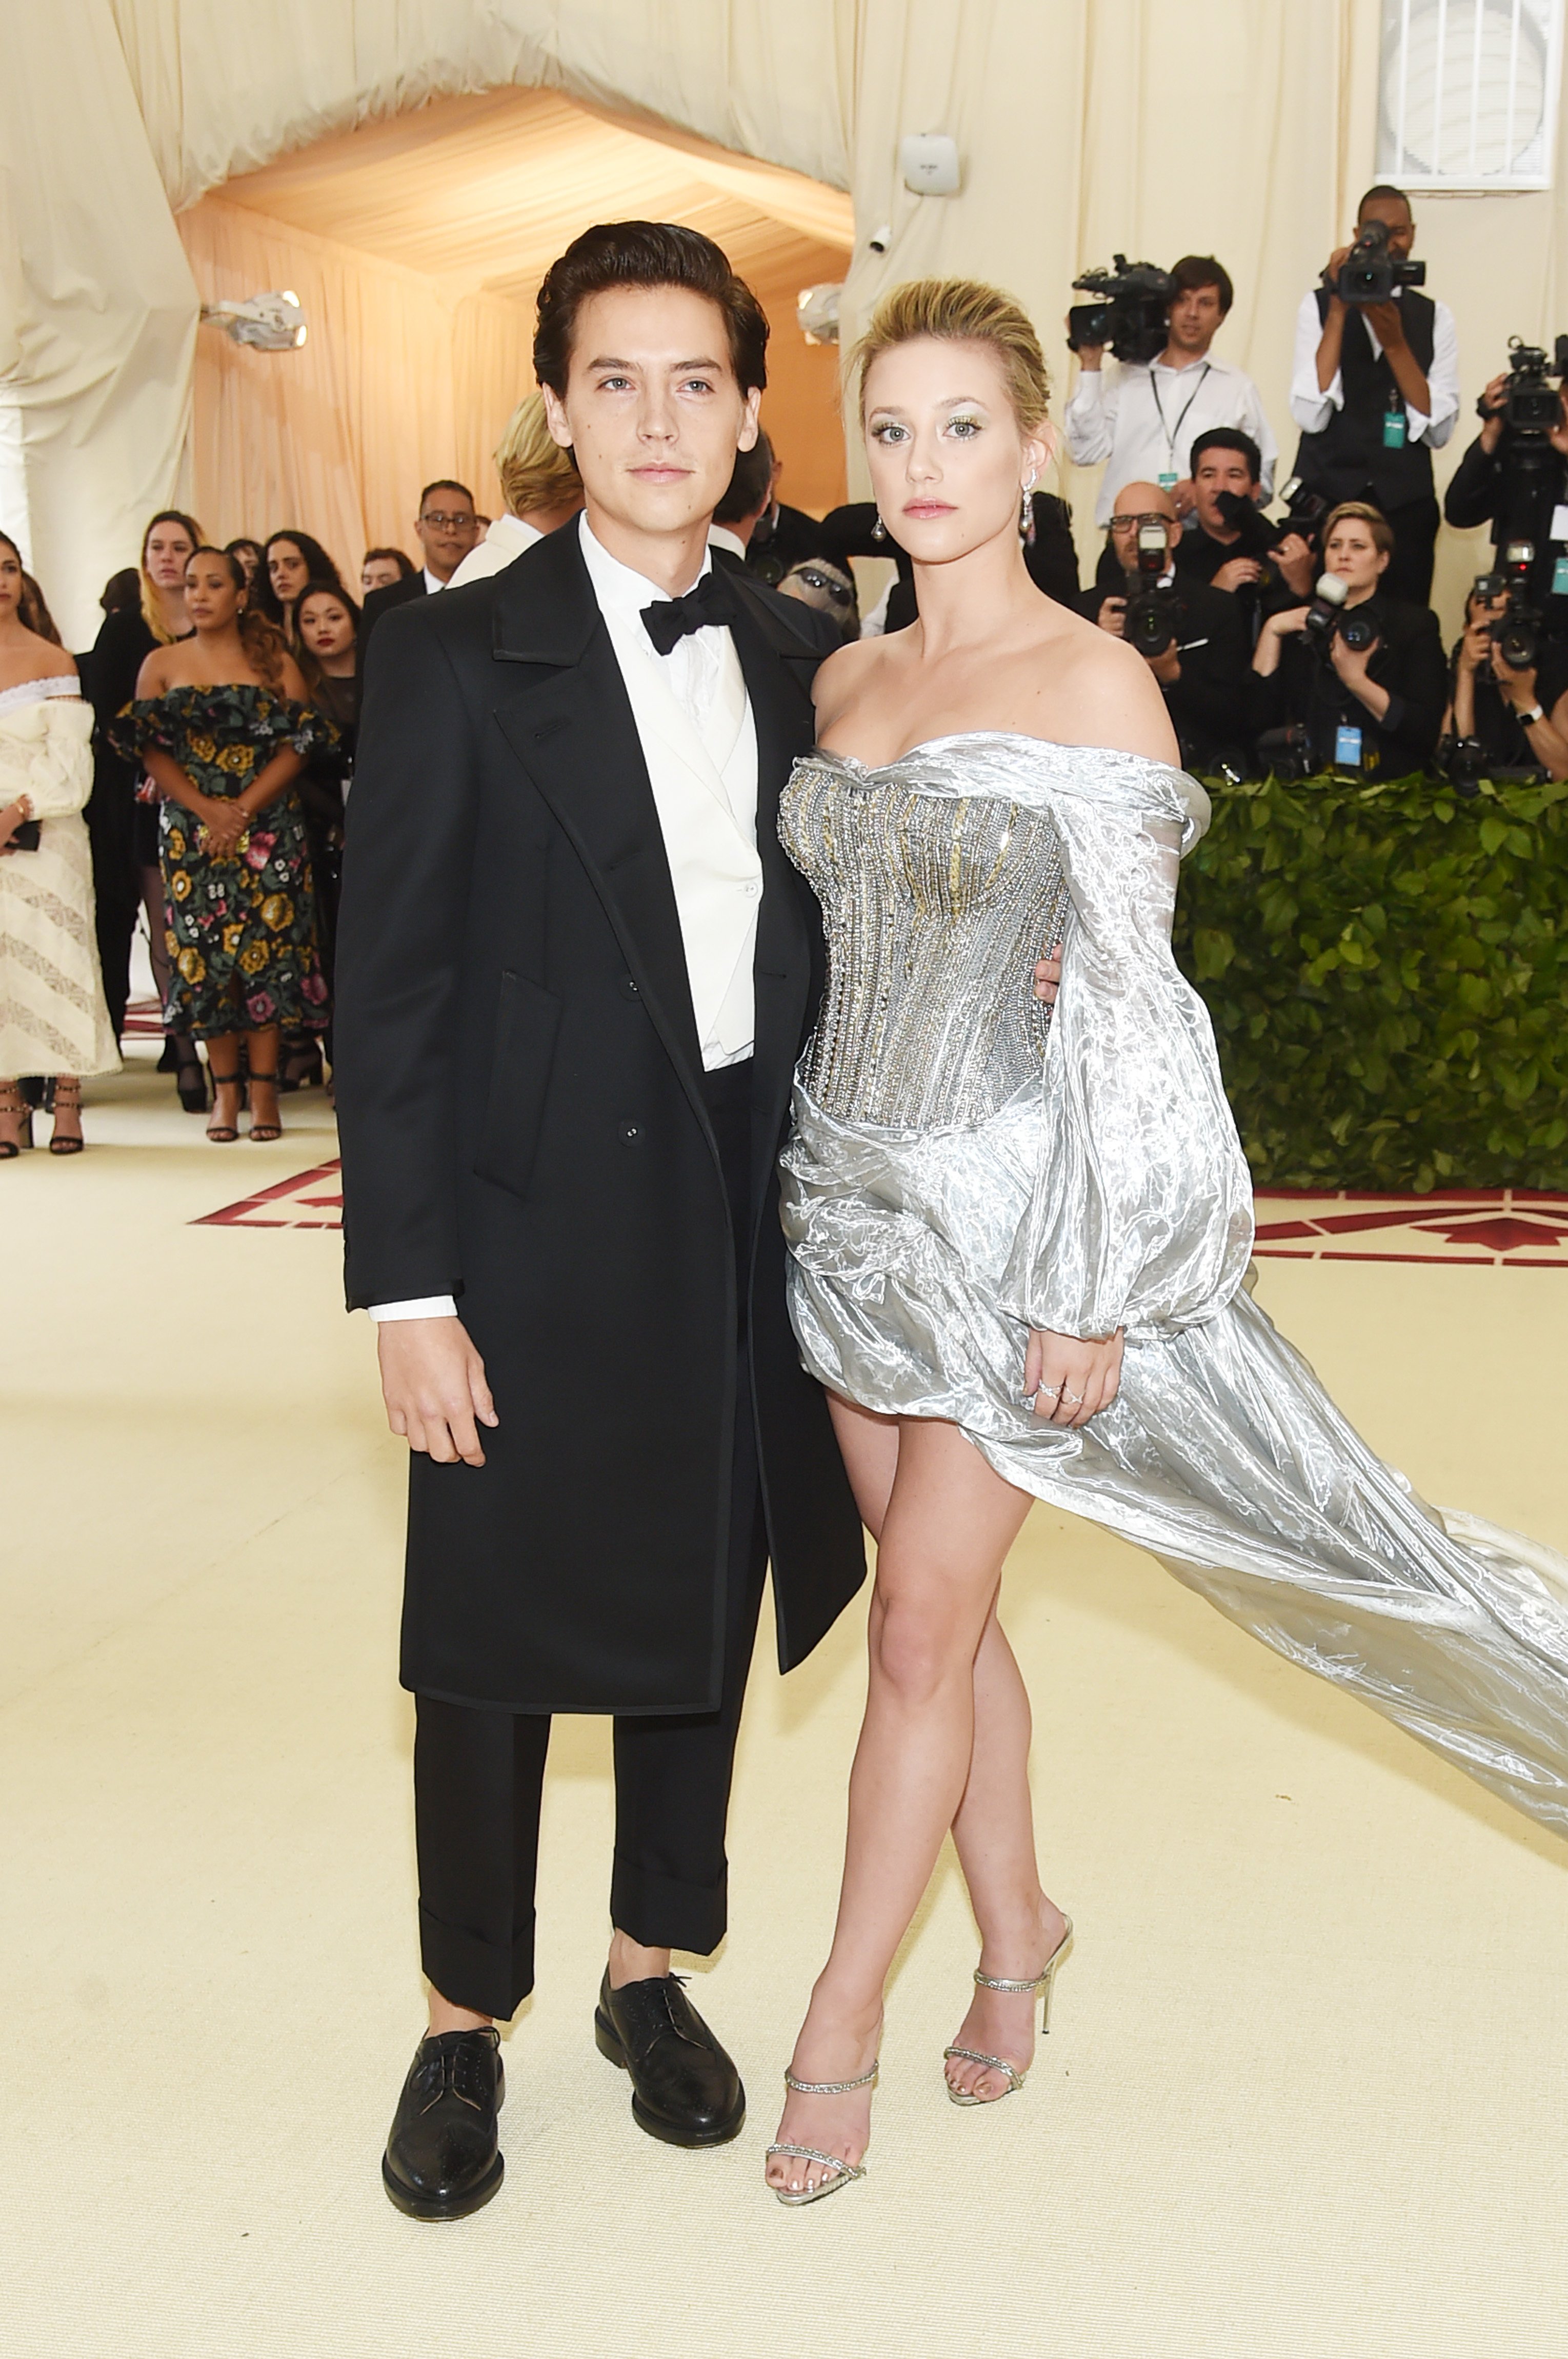 Cole Sprouse and Lili Reinhart attend the Met Gala on May 7, 2018, in New York City. | Source: Getty Images